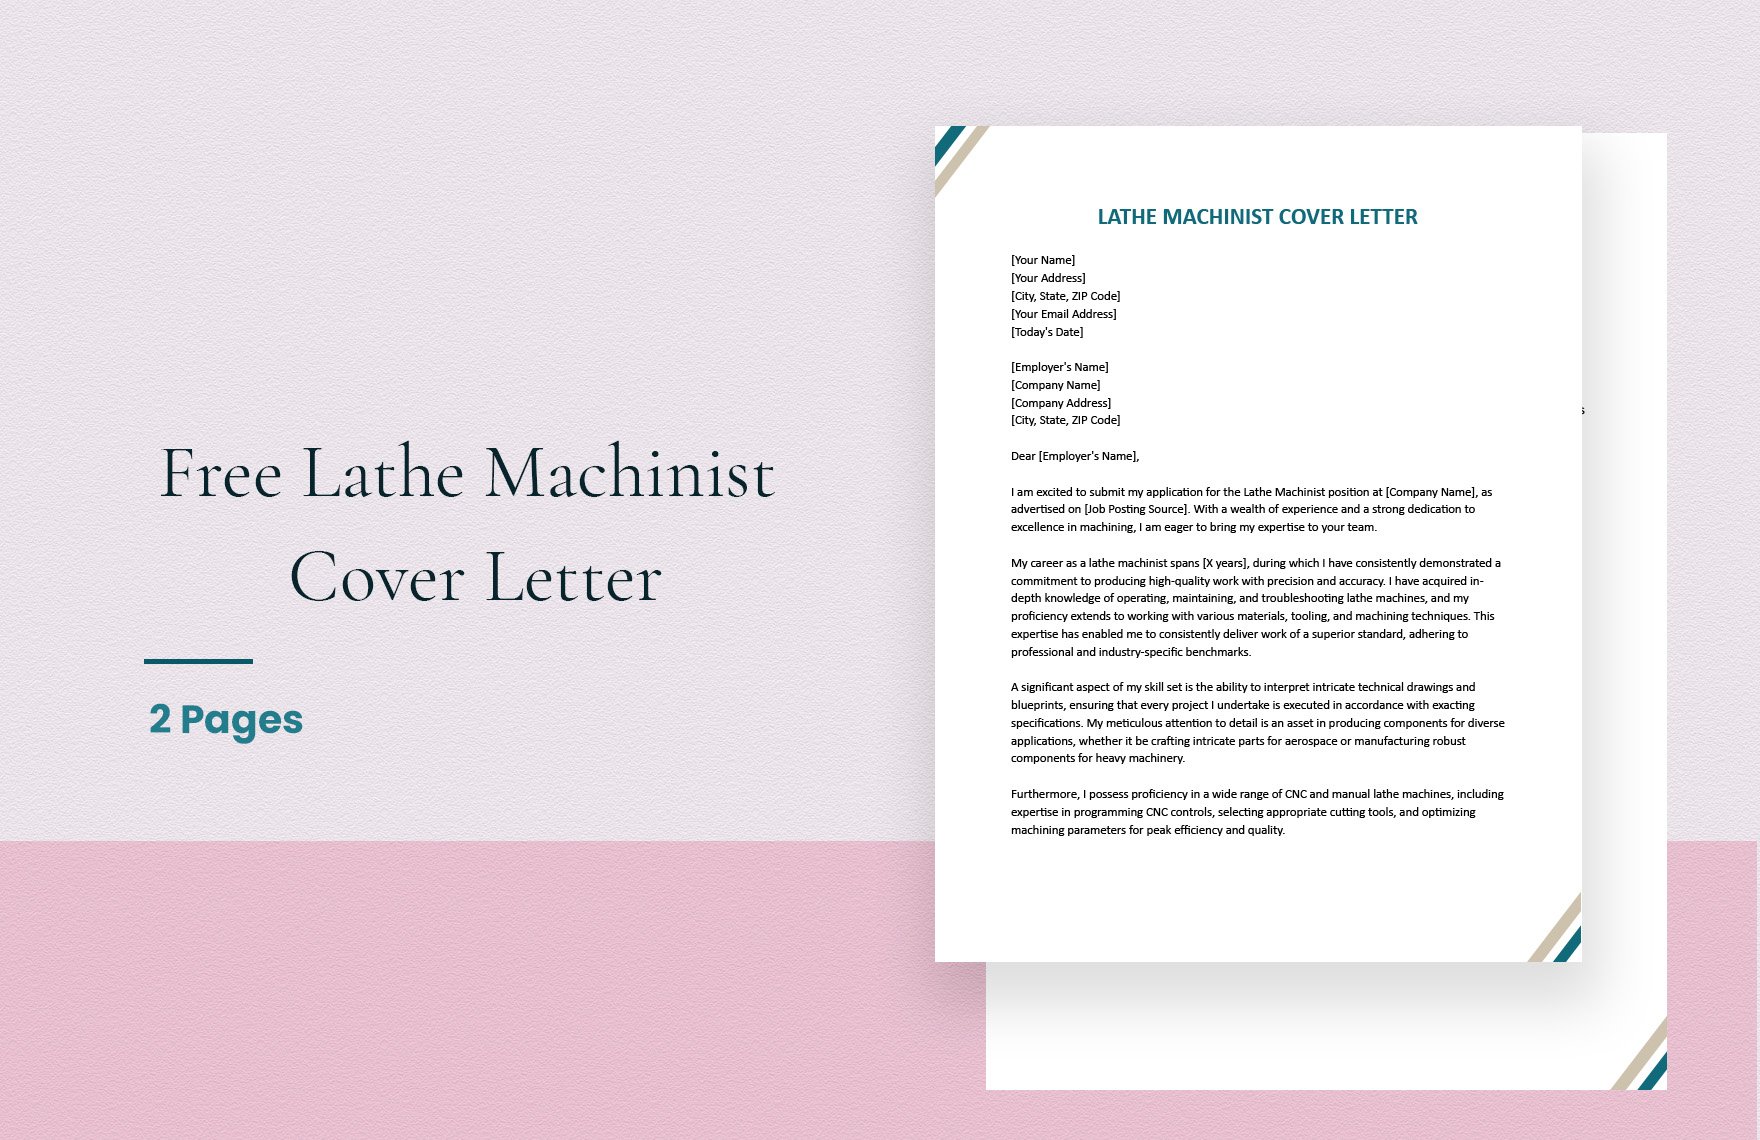 Lathe Machinist Cover Letter